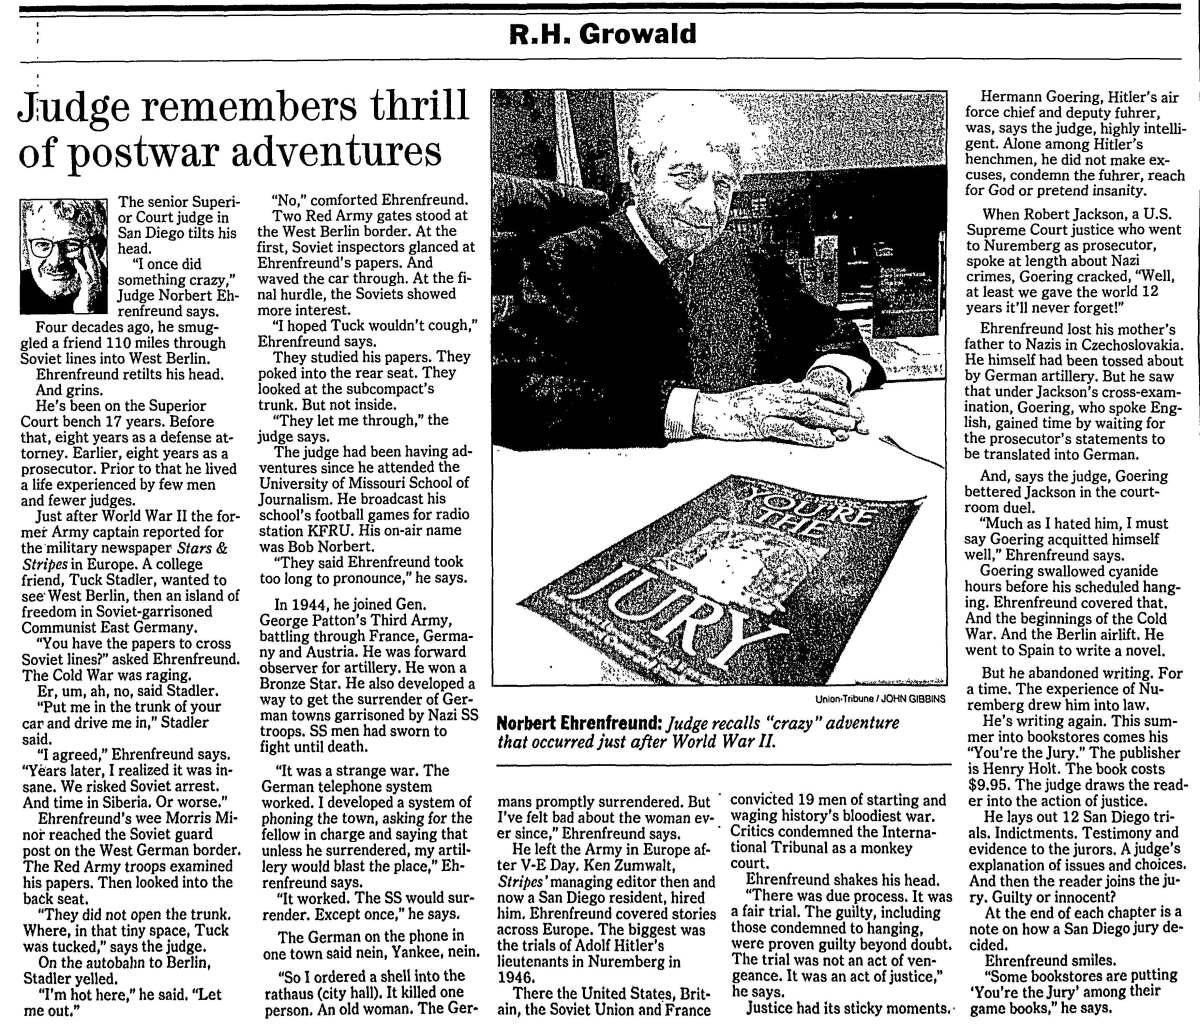 "Judge remembers thrill of postwar adventures," published in The San Diego Union-Tribune Aug. 15, 1992.